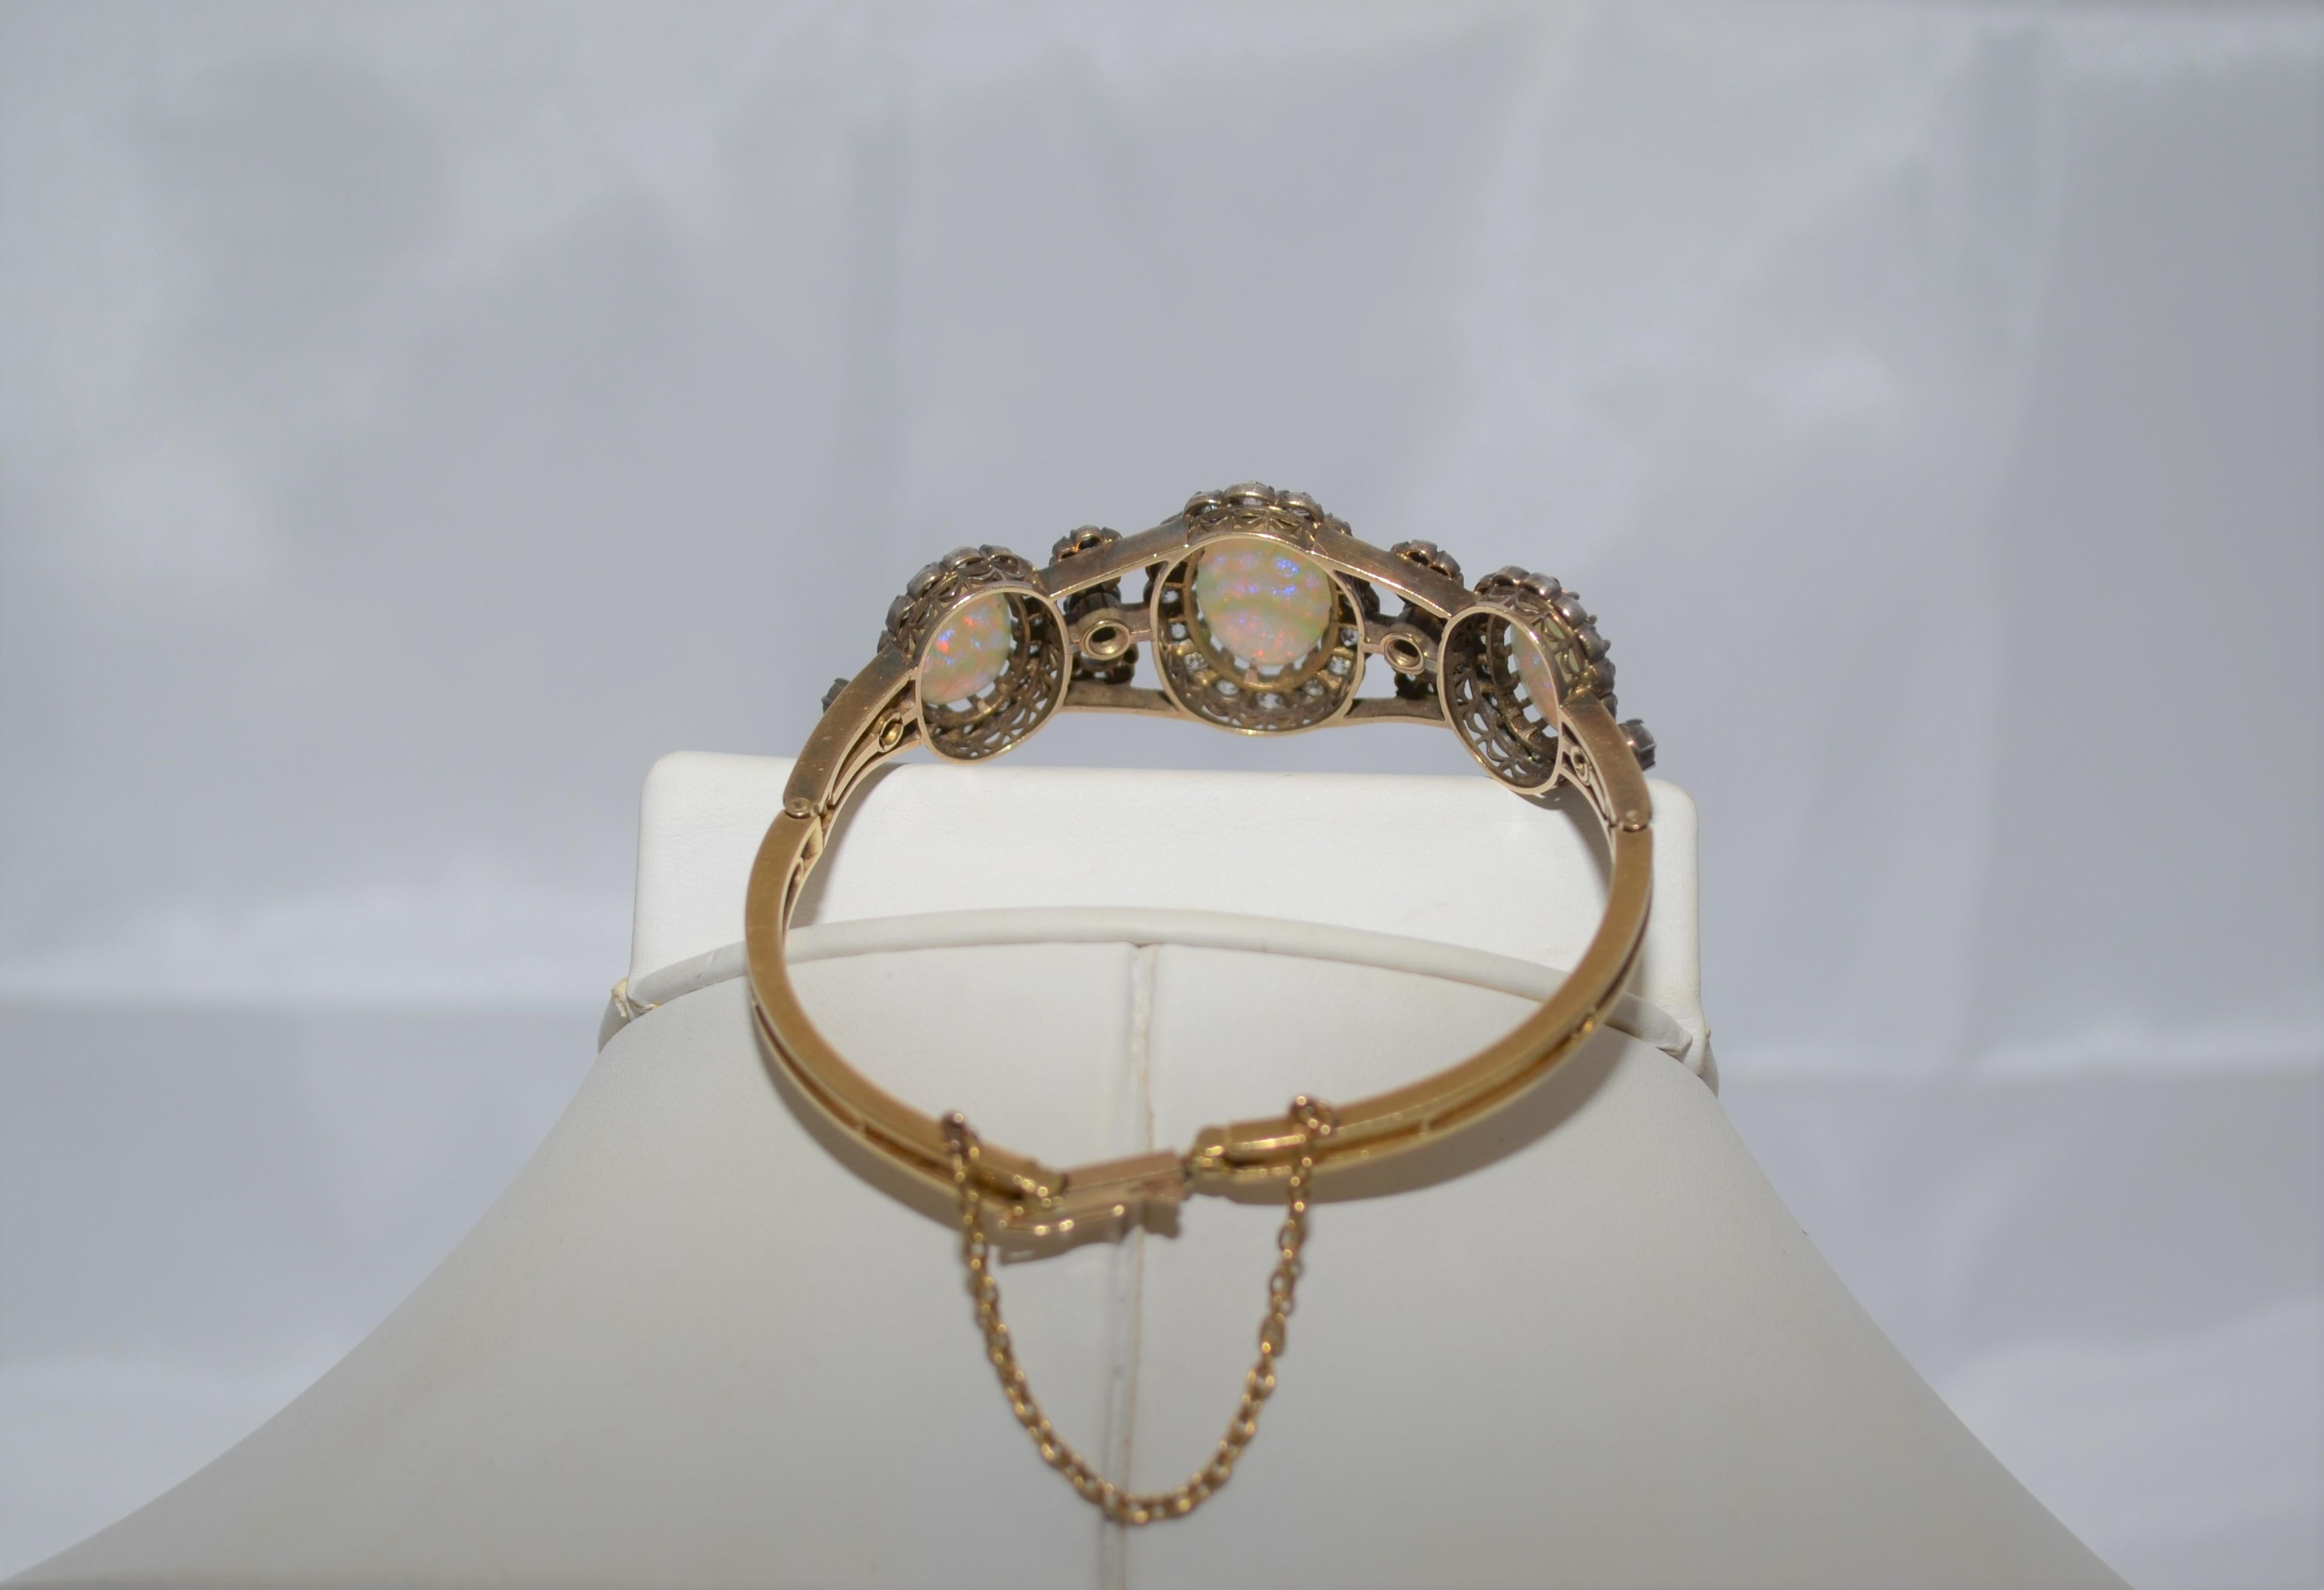 Late 19th Century Victorian Gold, Silver Bracelet with Diamonds and Opals 3